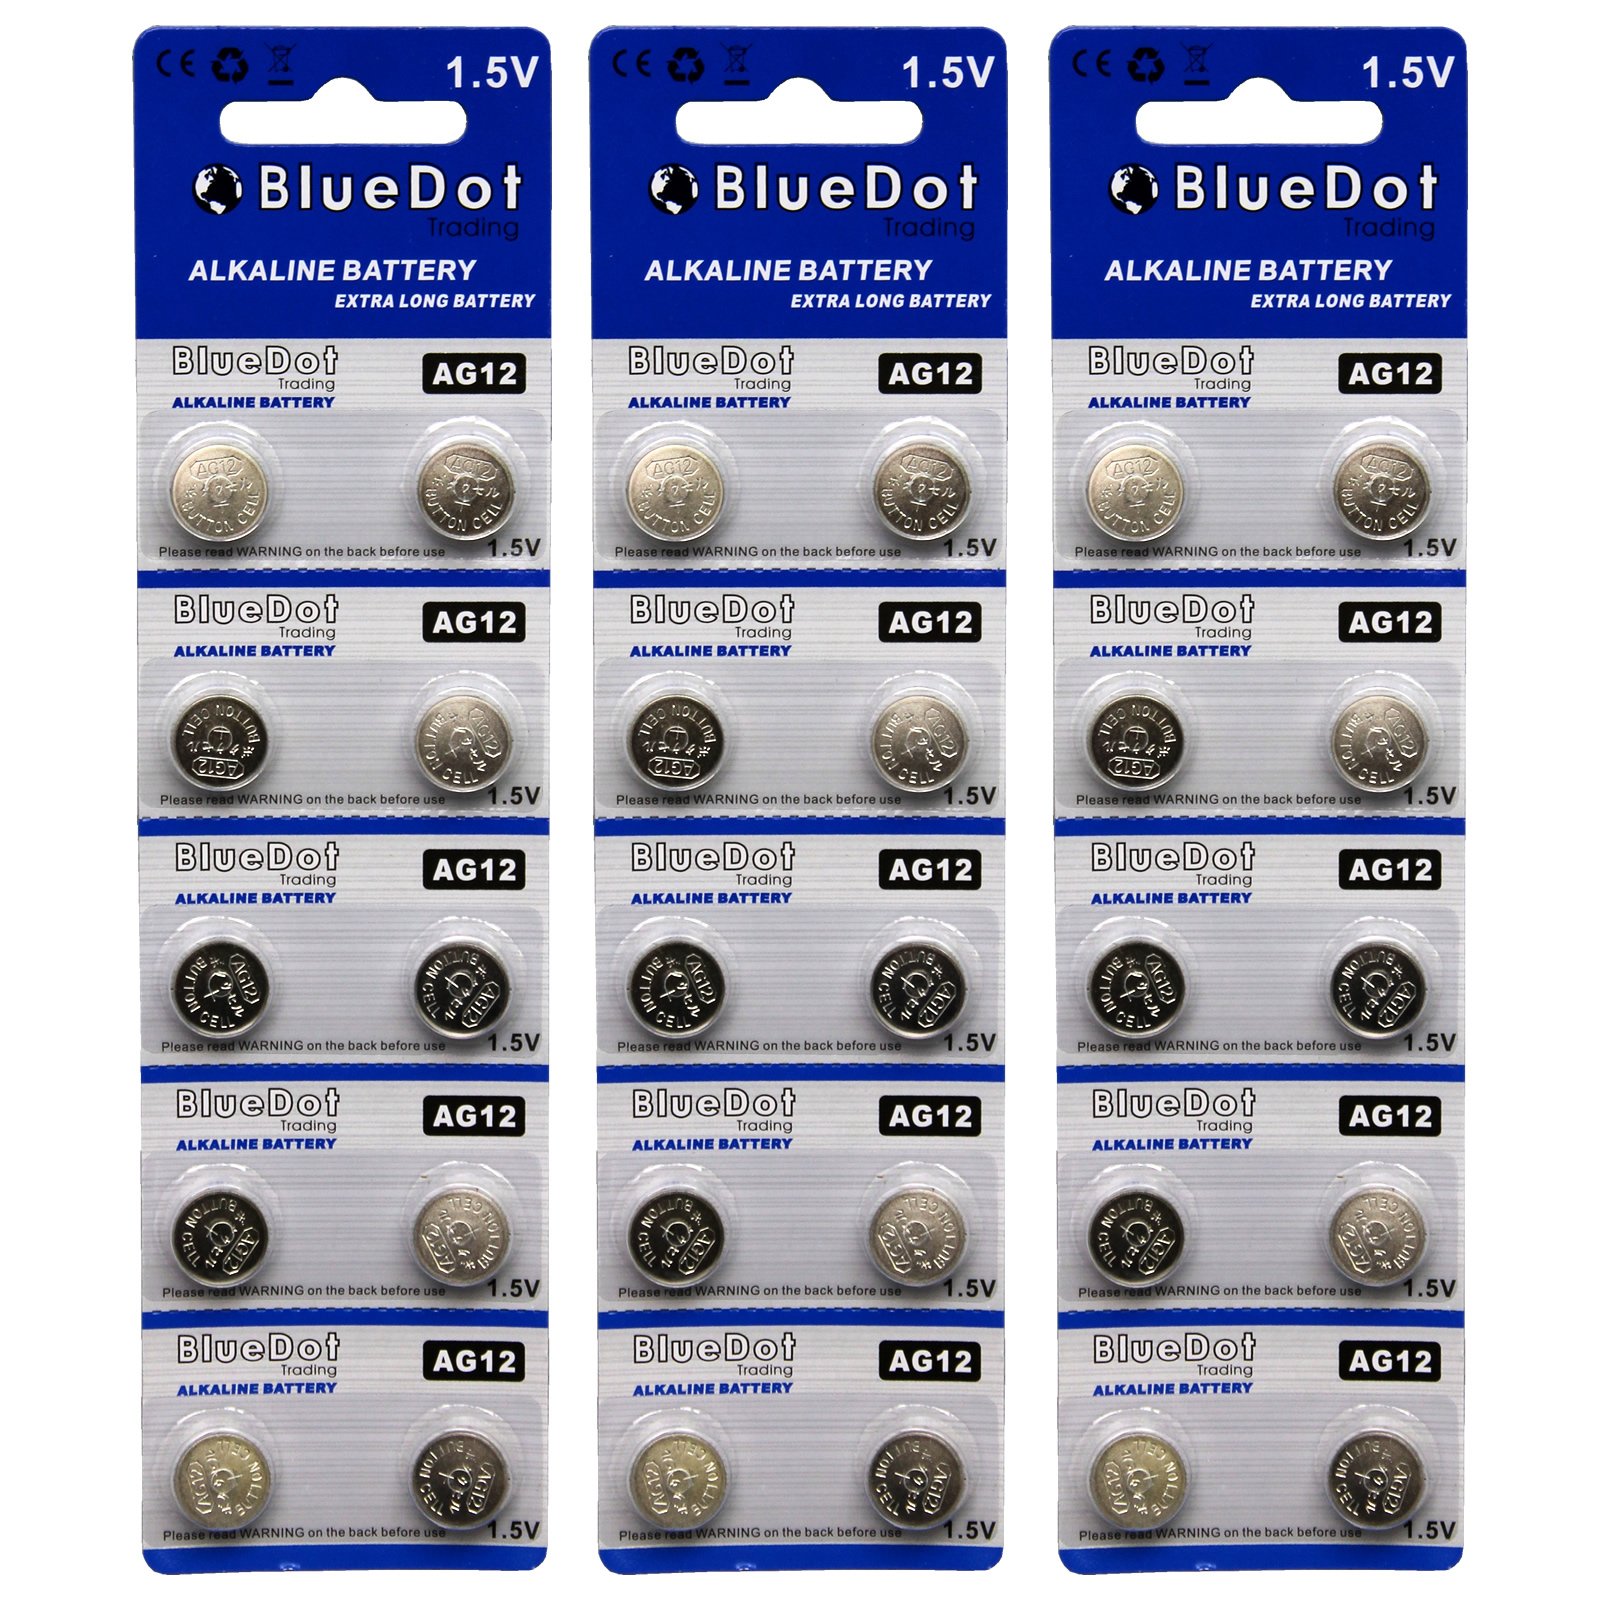 BlueDot Trading AG12 LR43 SR43 260 386 1.5V Alkaline Coin Cell Battery for Watch, Hearing Aid, Calculator, Flashlights, Keyless entry, Blister Pack - 30 Count